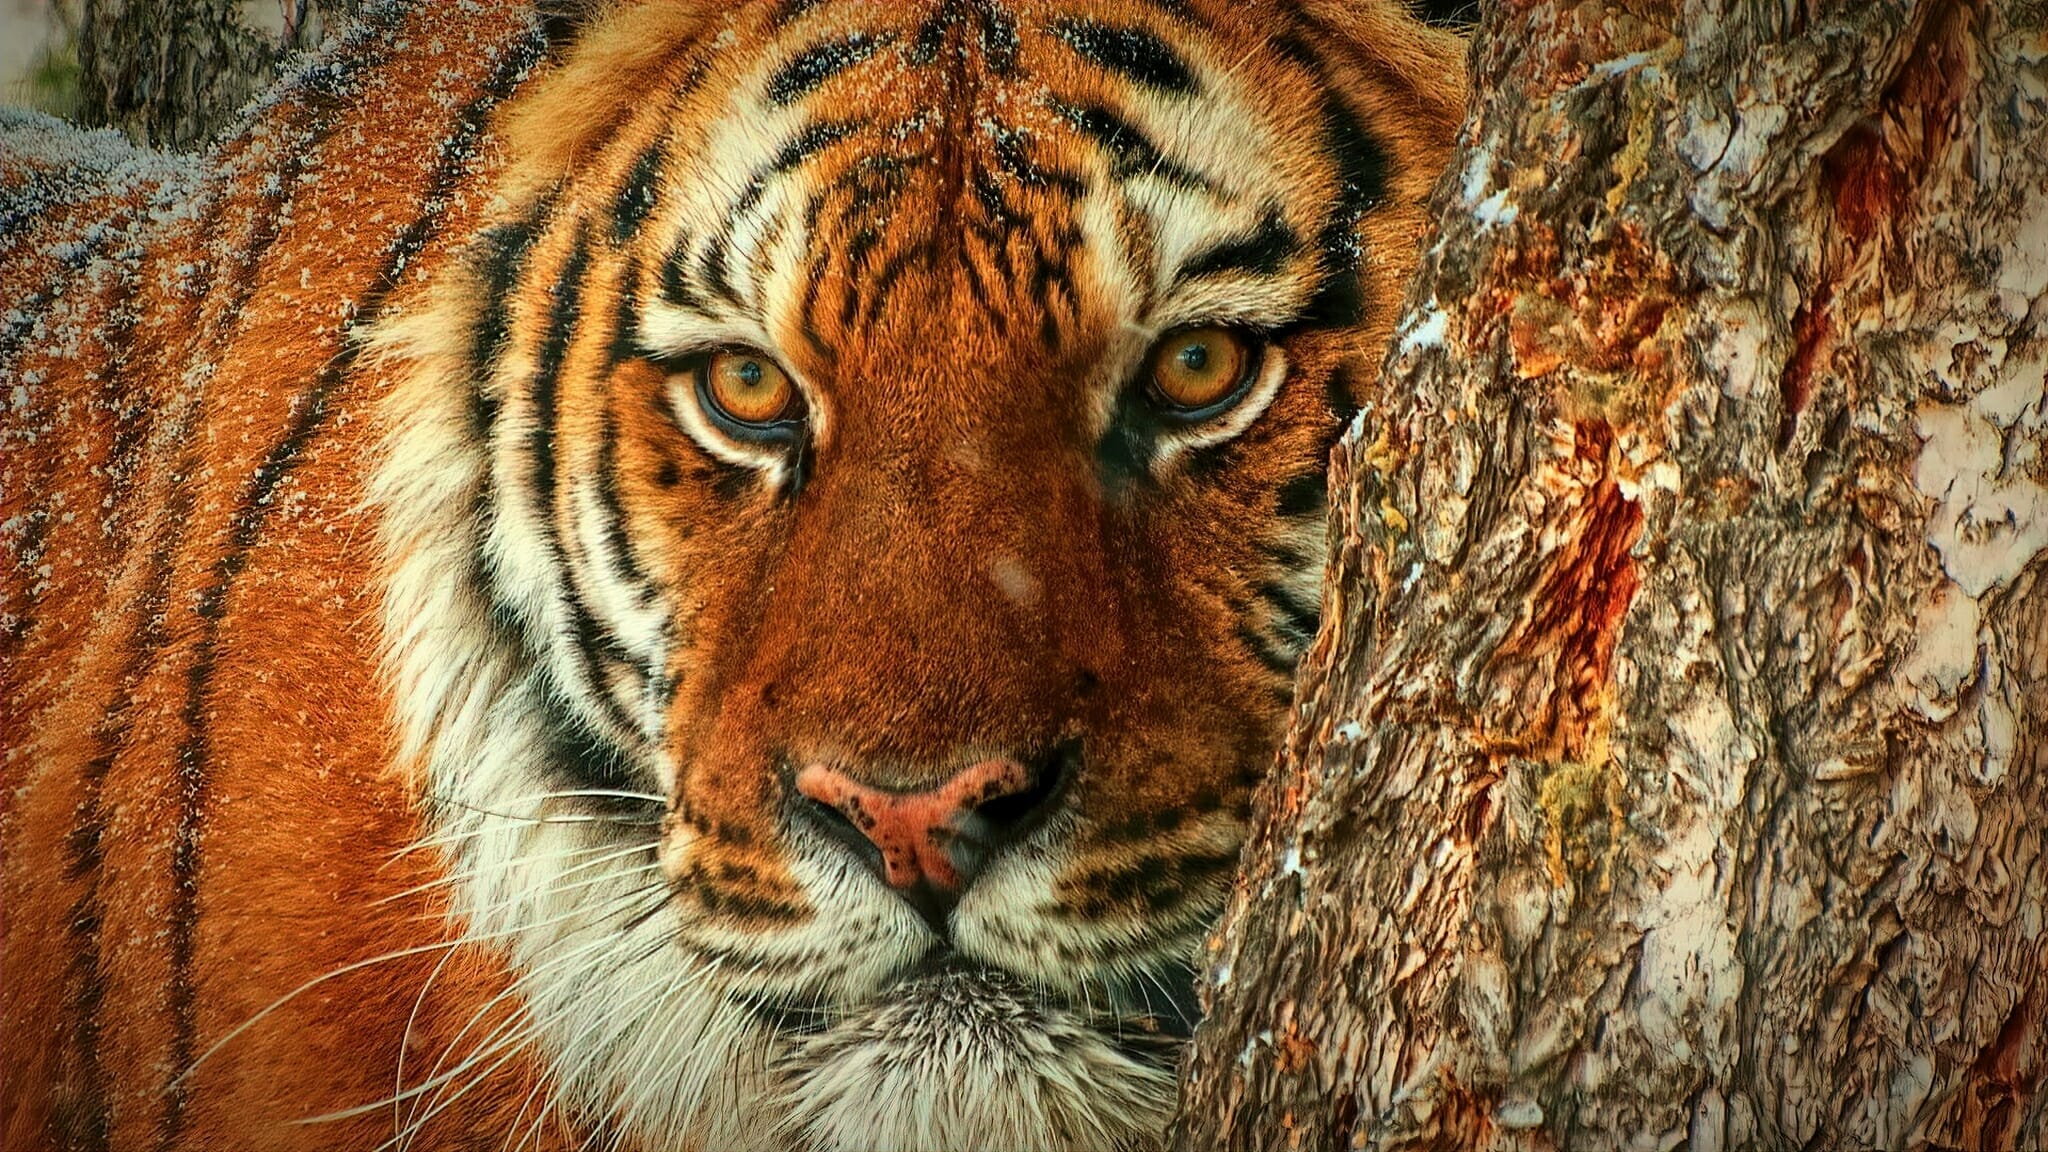 The eyes of a tiger. Life through a Siberian tigers eyes